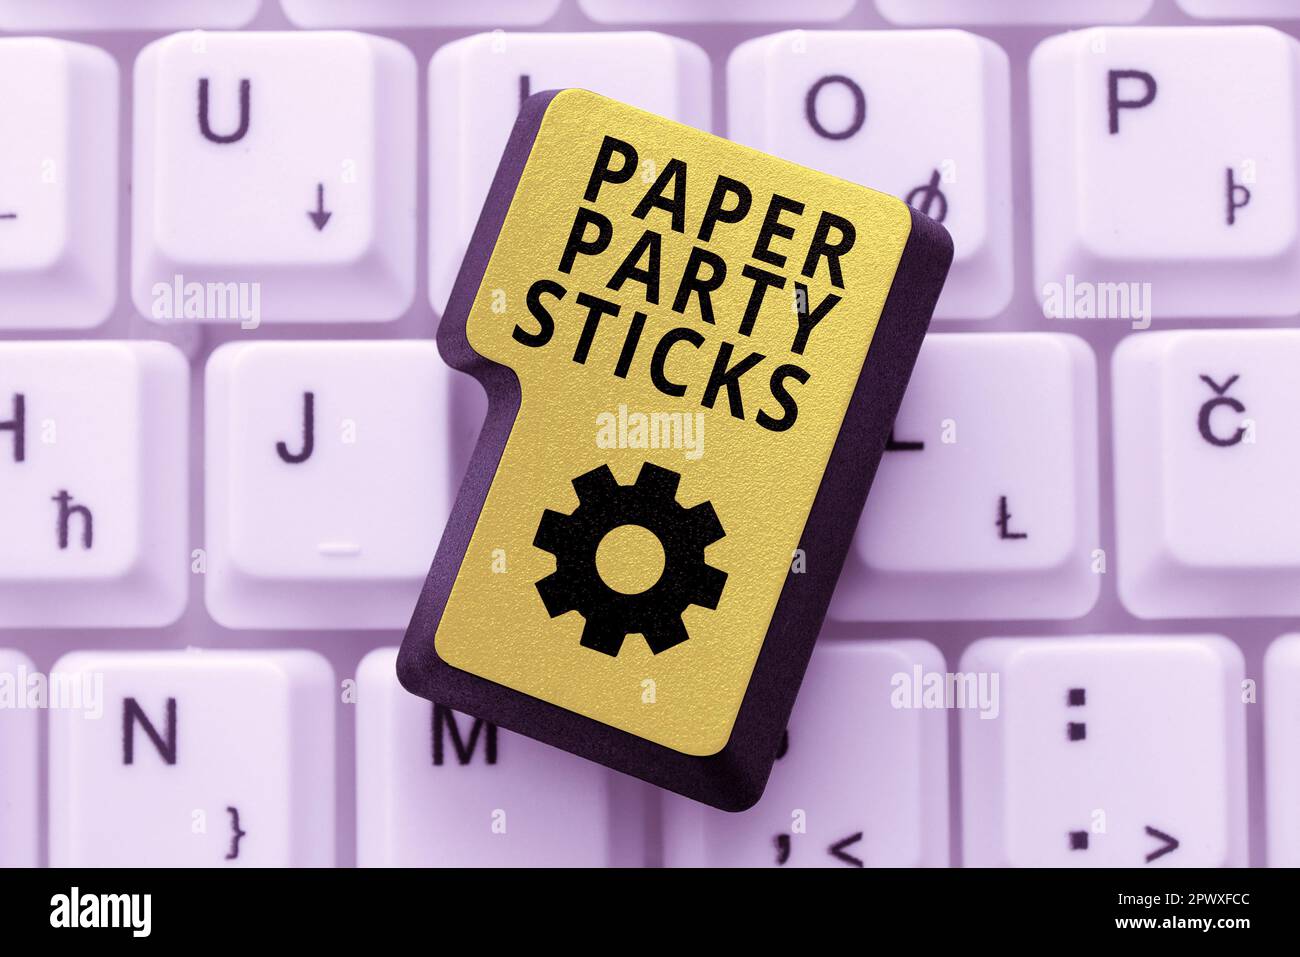 Text sign showing Paper Party Sticks, Business concept hard painted paper shaped used for signs and emoji Stock Photo